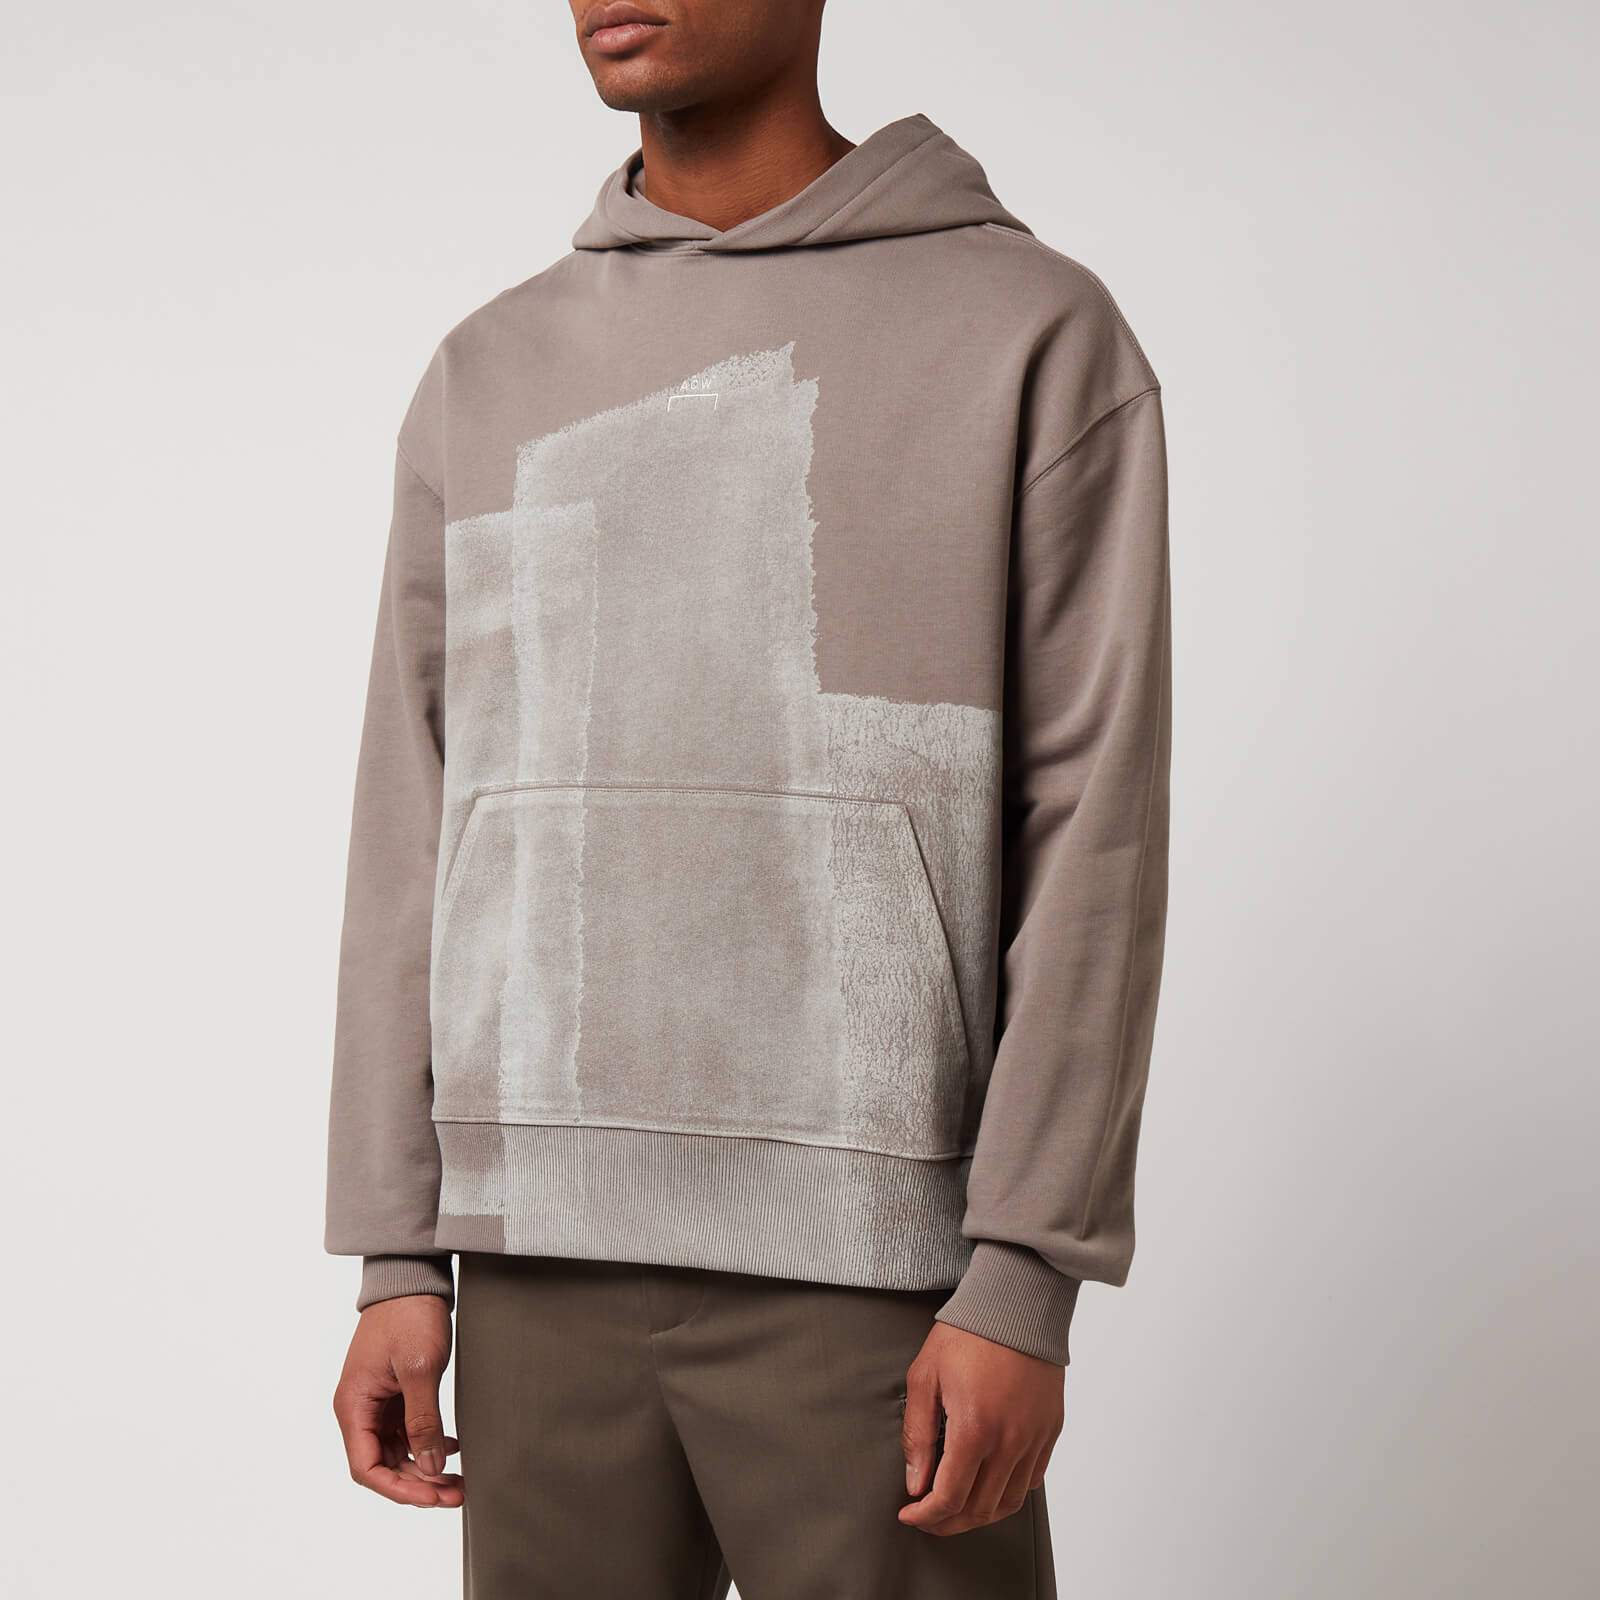 A-COLD-WALL* Men's Collage Hoodie - Mid Grey - S